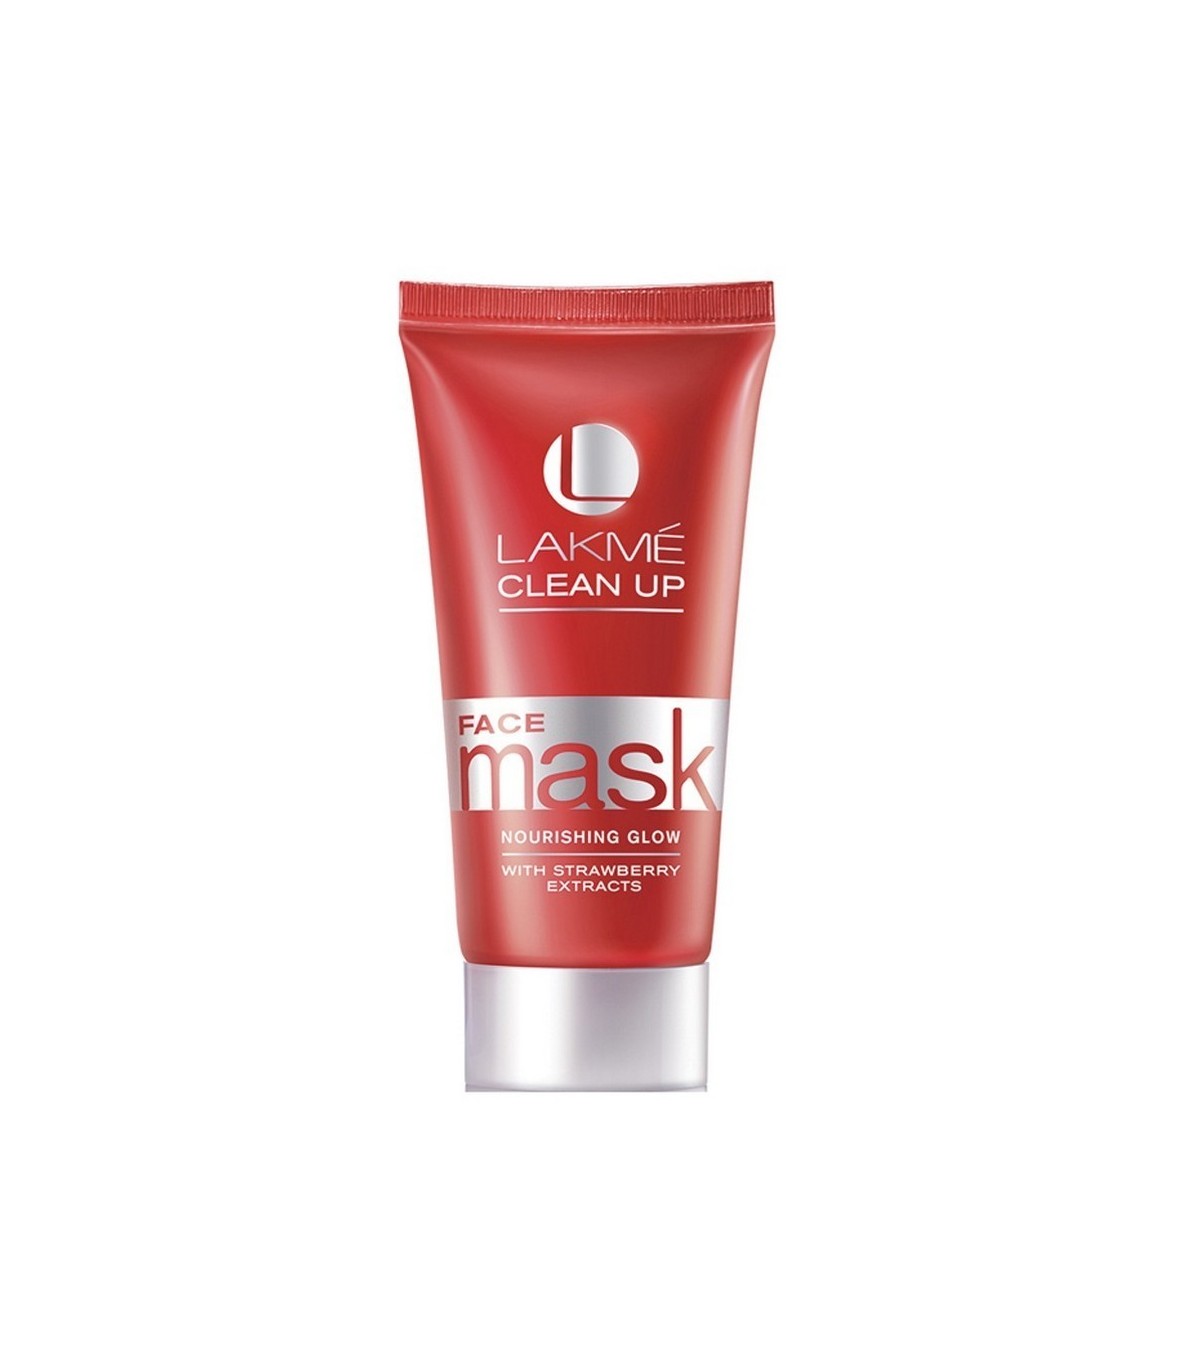 LAKME Clean Up Face Mask 50g